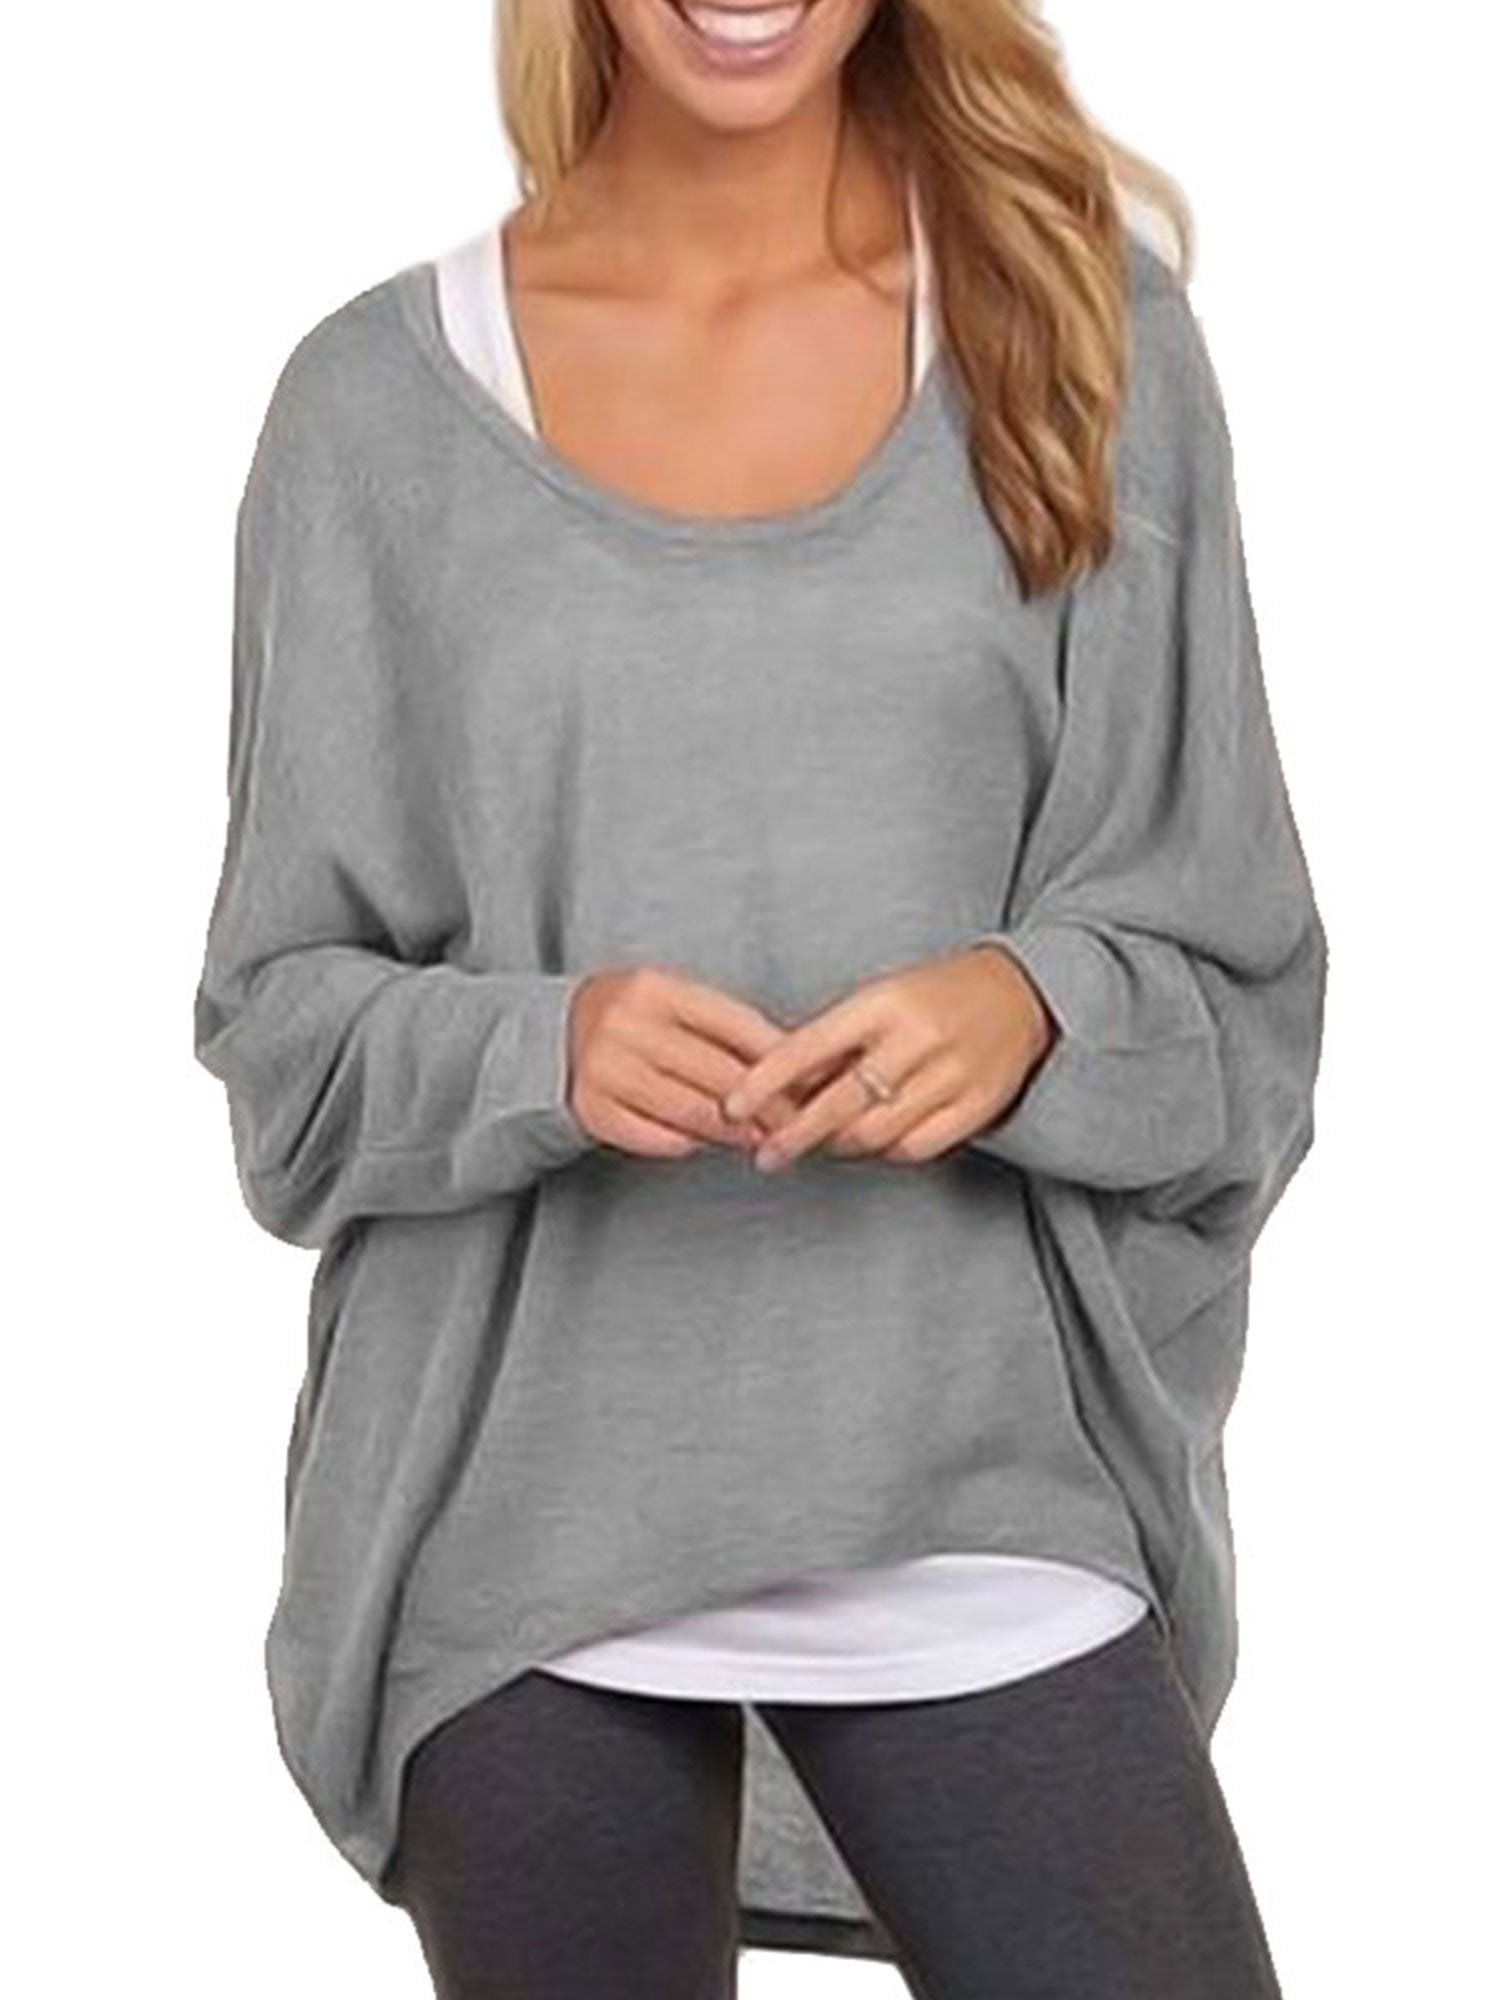 Womens Sweater Casual Oversized Baggy Shirts Sleeve Pullover Shirts Tops